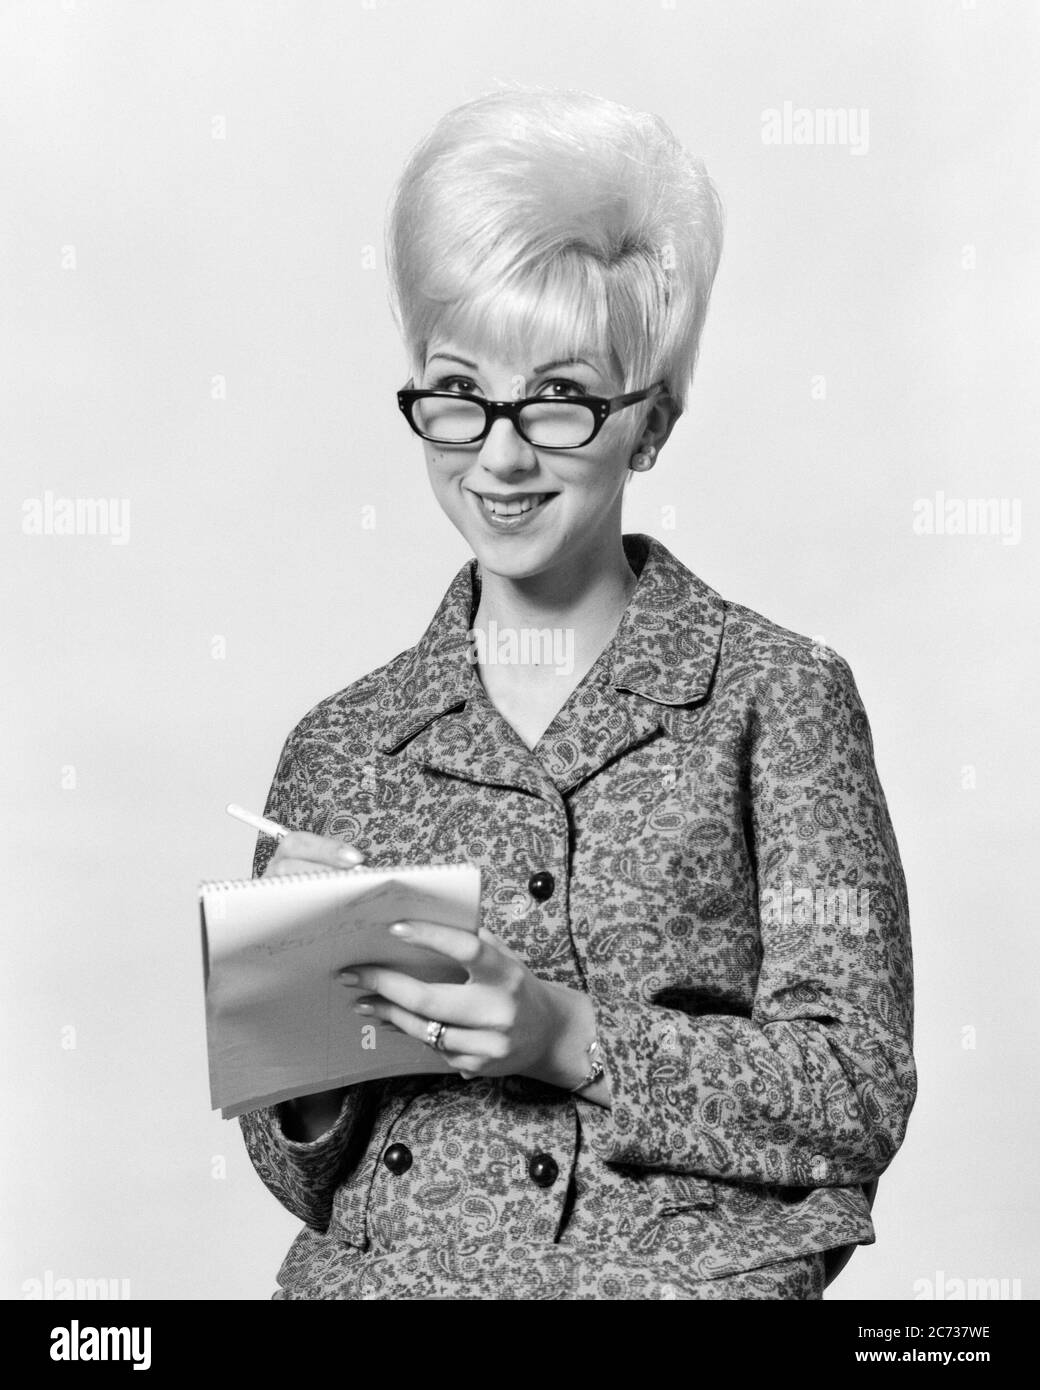 1960s SMILING BLONDE WOMAN SECRETARY IN WOOL SUIT WITH BOUFFANT HAIRDO  WEARING CAT EYE GLASSES LOOKING AT CAMERA TAKING NOTES - asp jo7378a ASP001  HARS STYLE PAD COMMUNICATION CAREER BLOND YOUNG ADULT